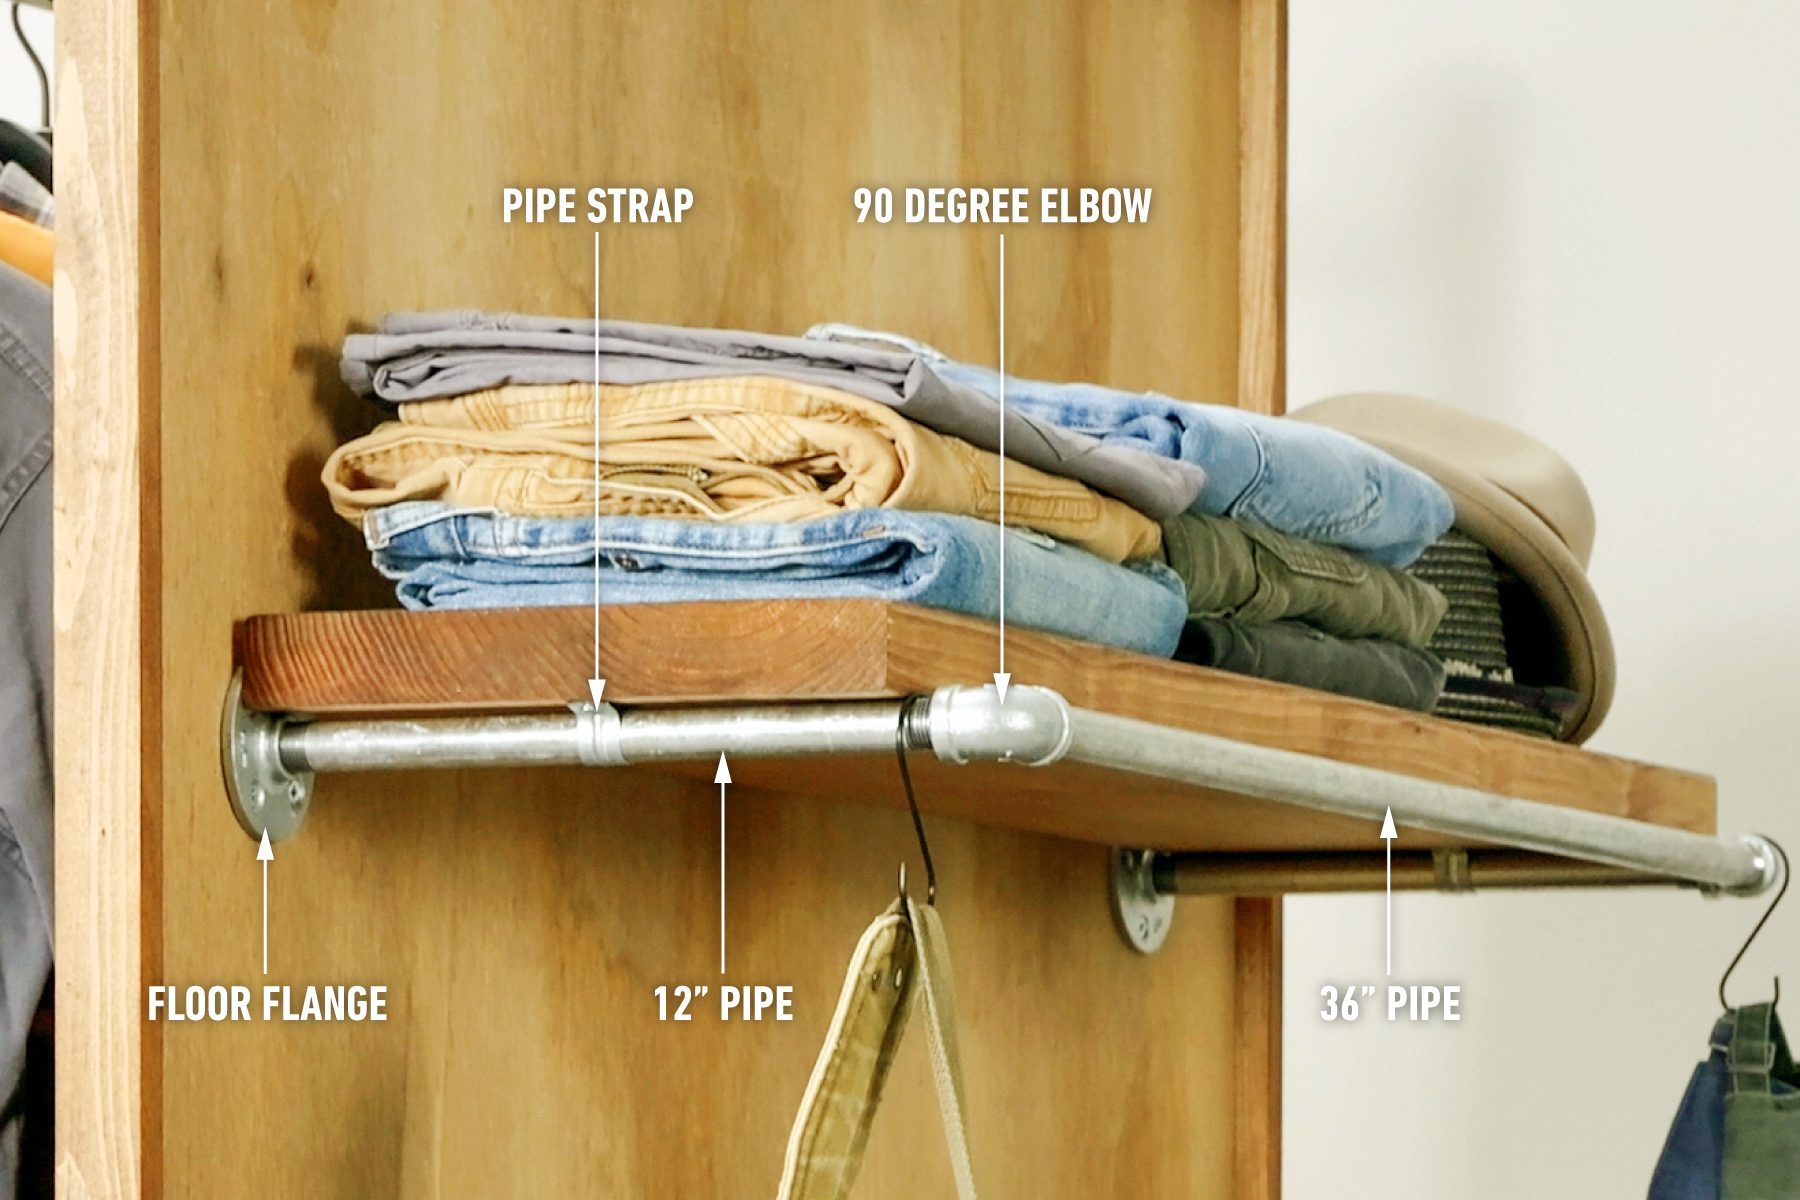 How To Make A Clothes Rack On Wheels Assemble the plumbing fittings for the shelves